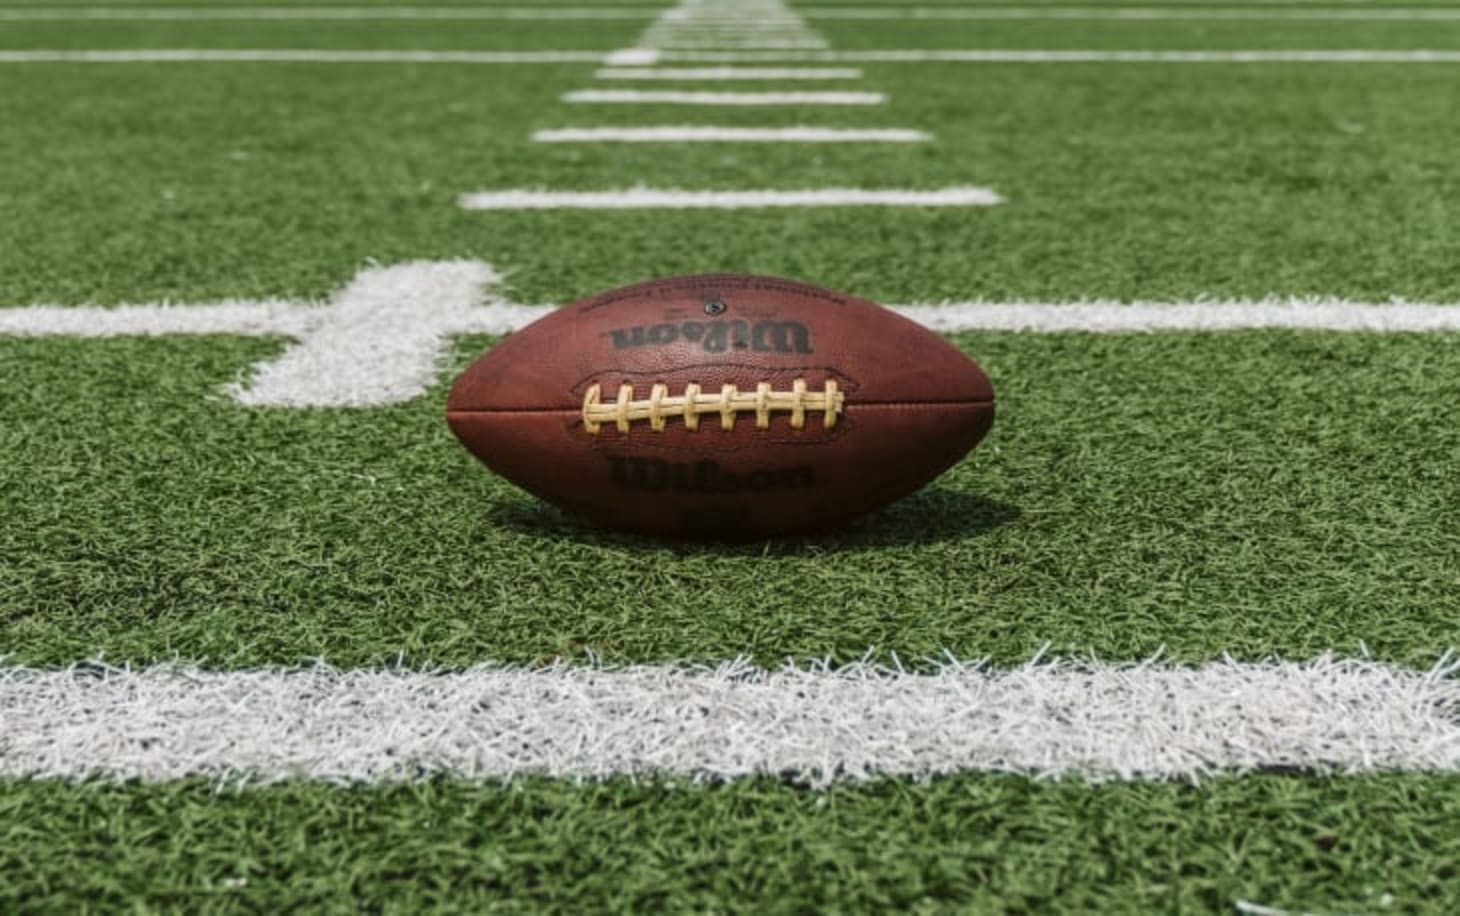 2021 NFL Season - Preview, Odds & Broadcasting Information